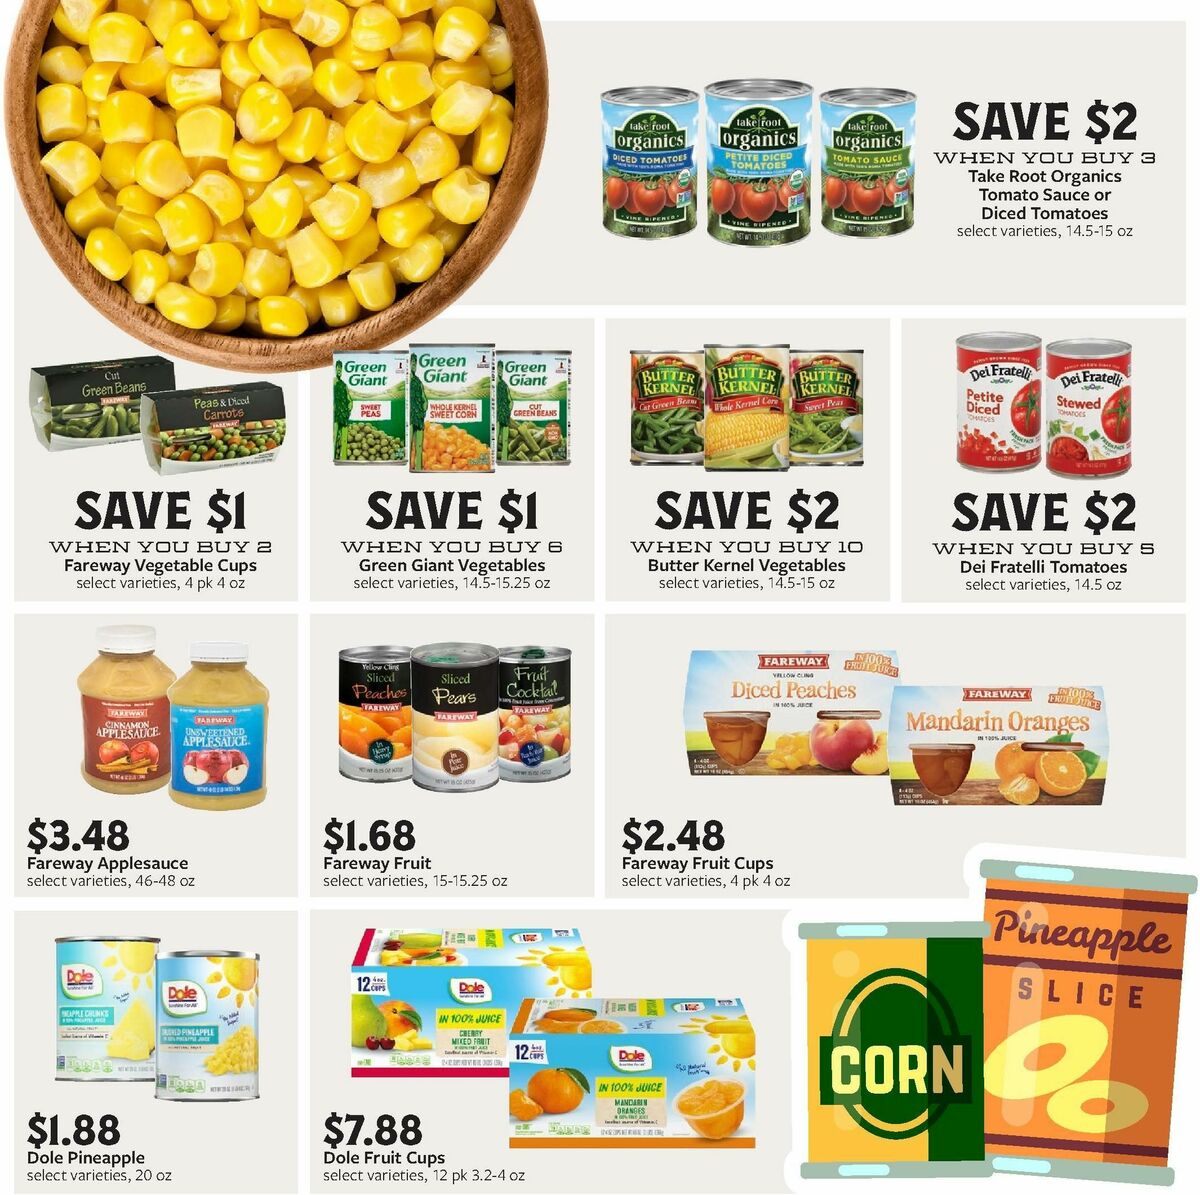 Fareway Monthly Ad Weekly Ad from January 29